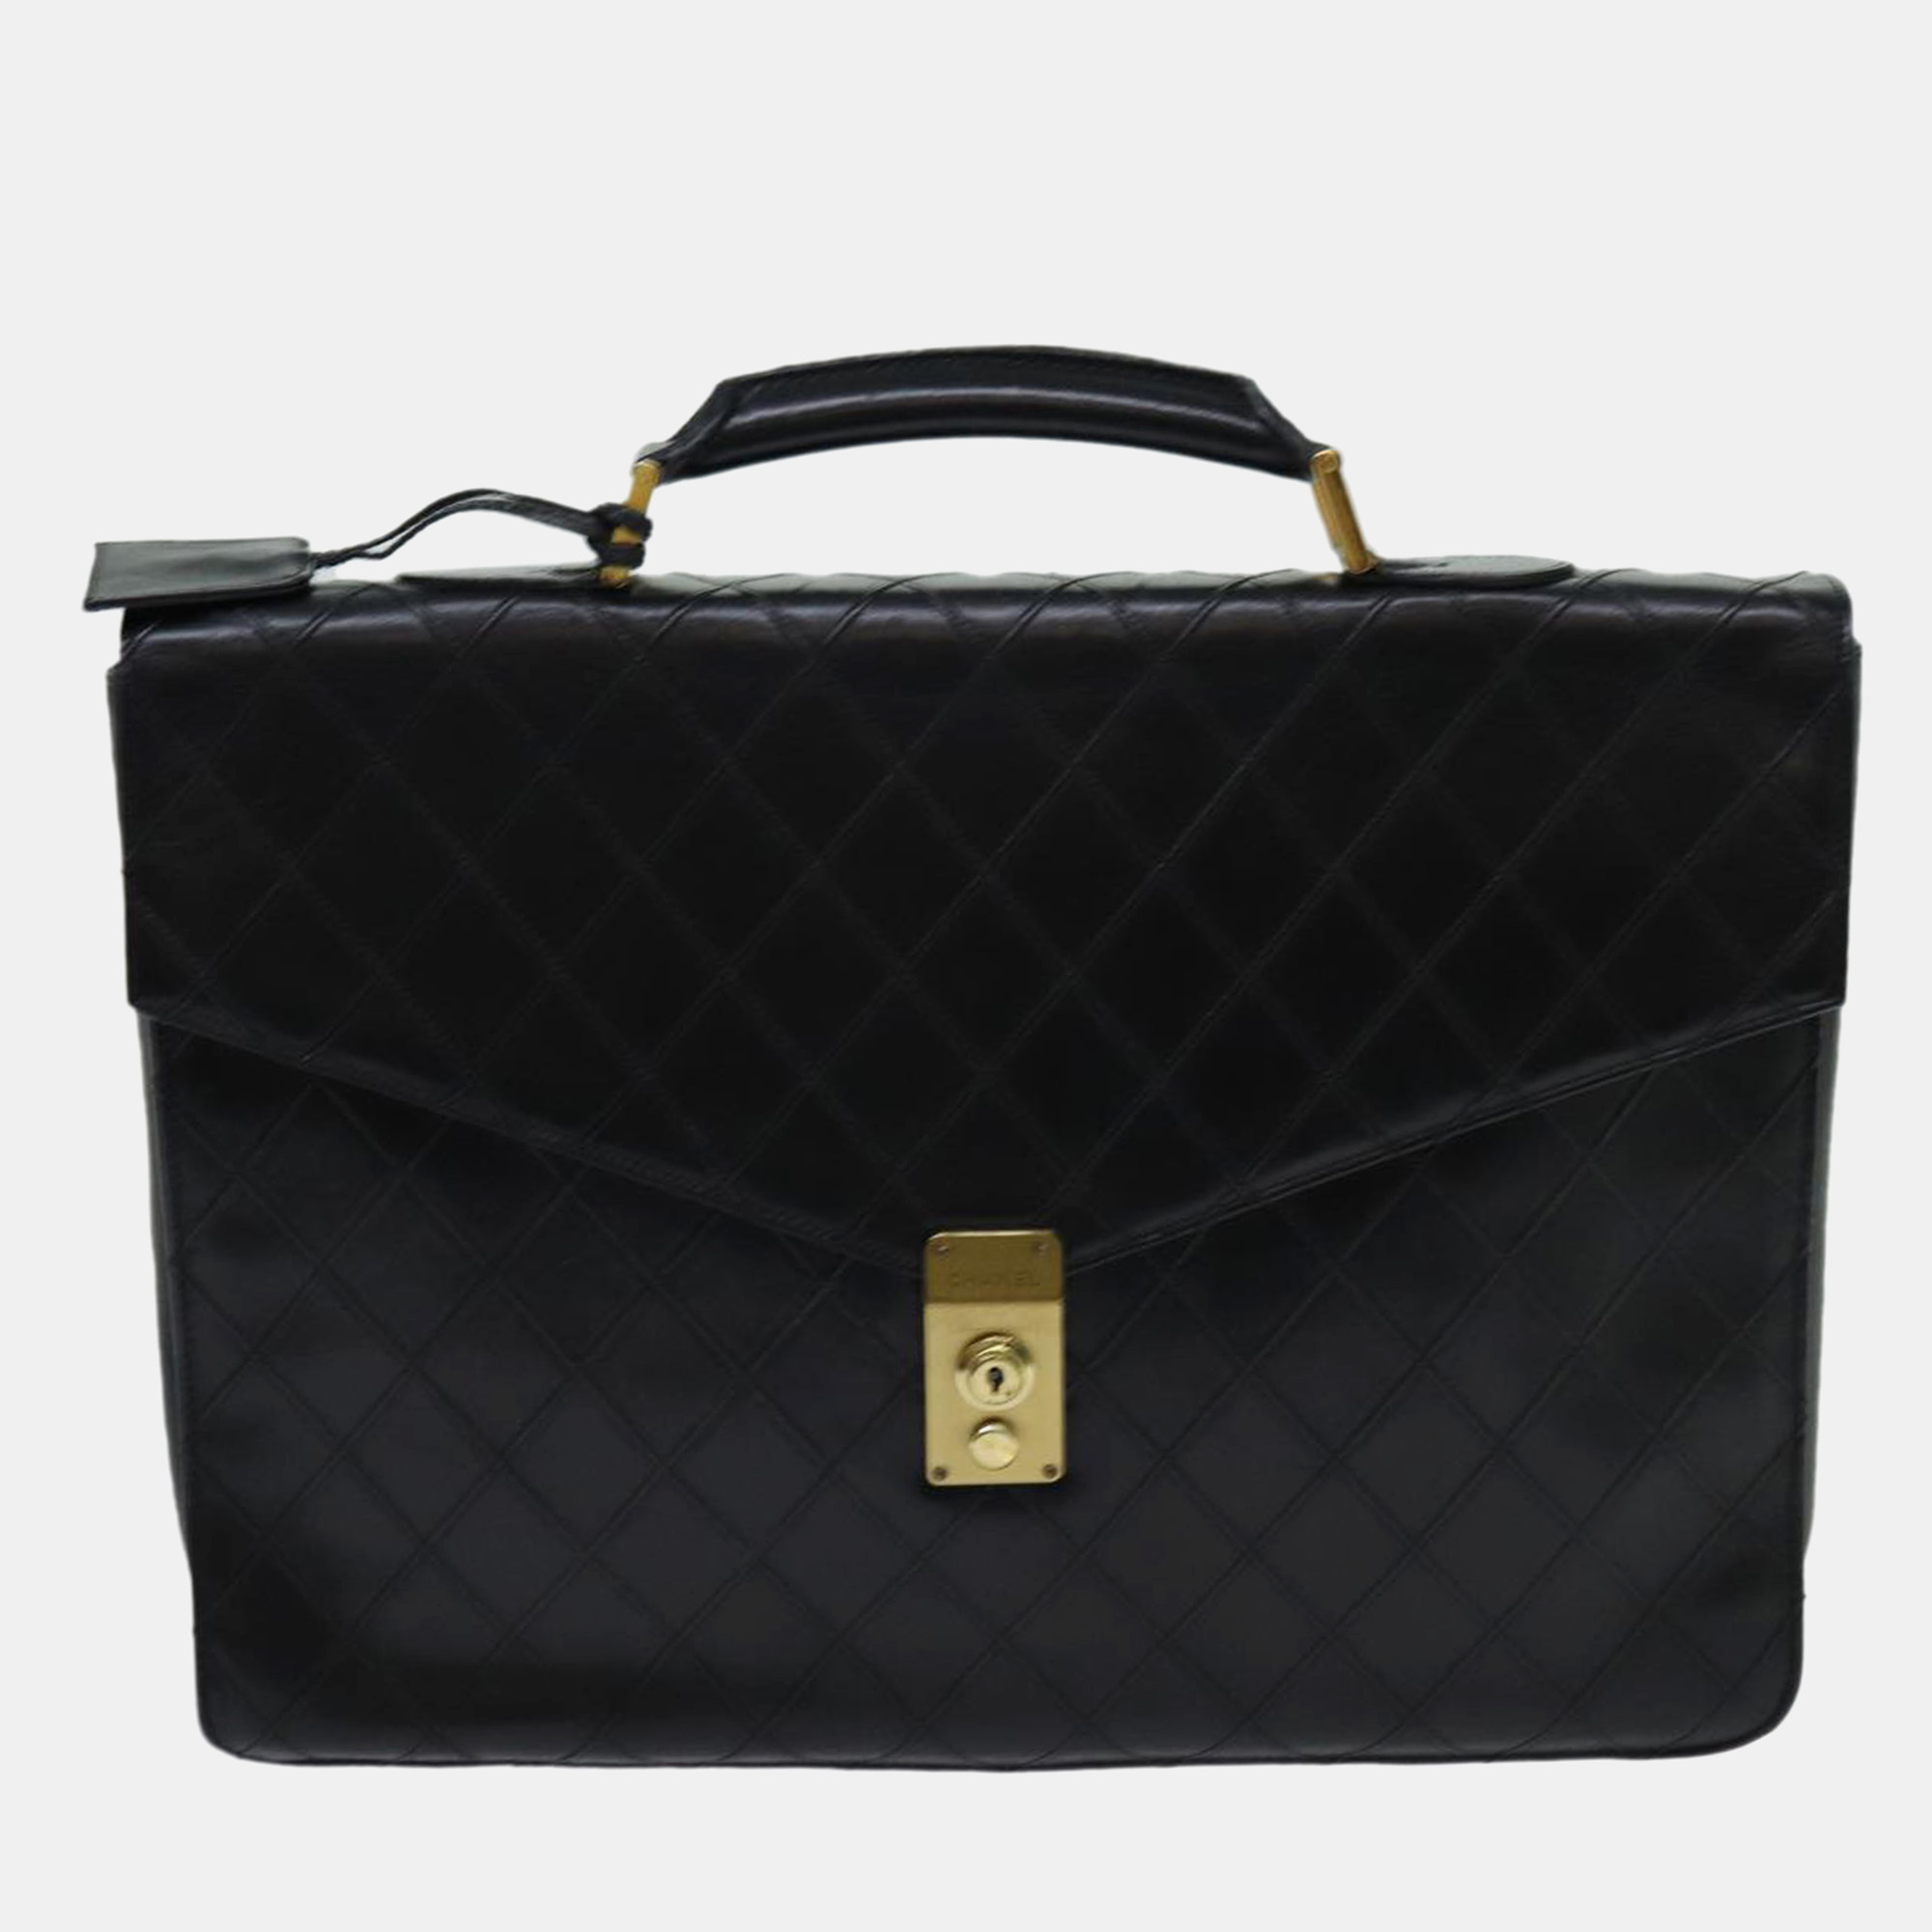 Chanel black quilted leather briefcase